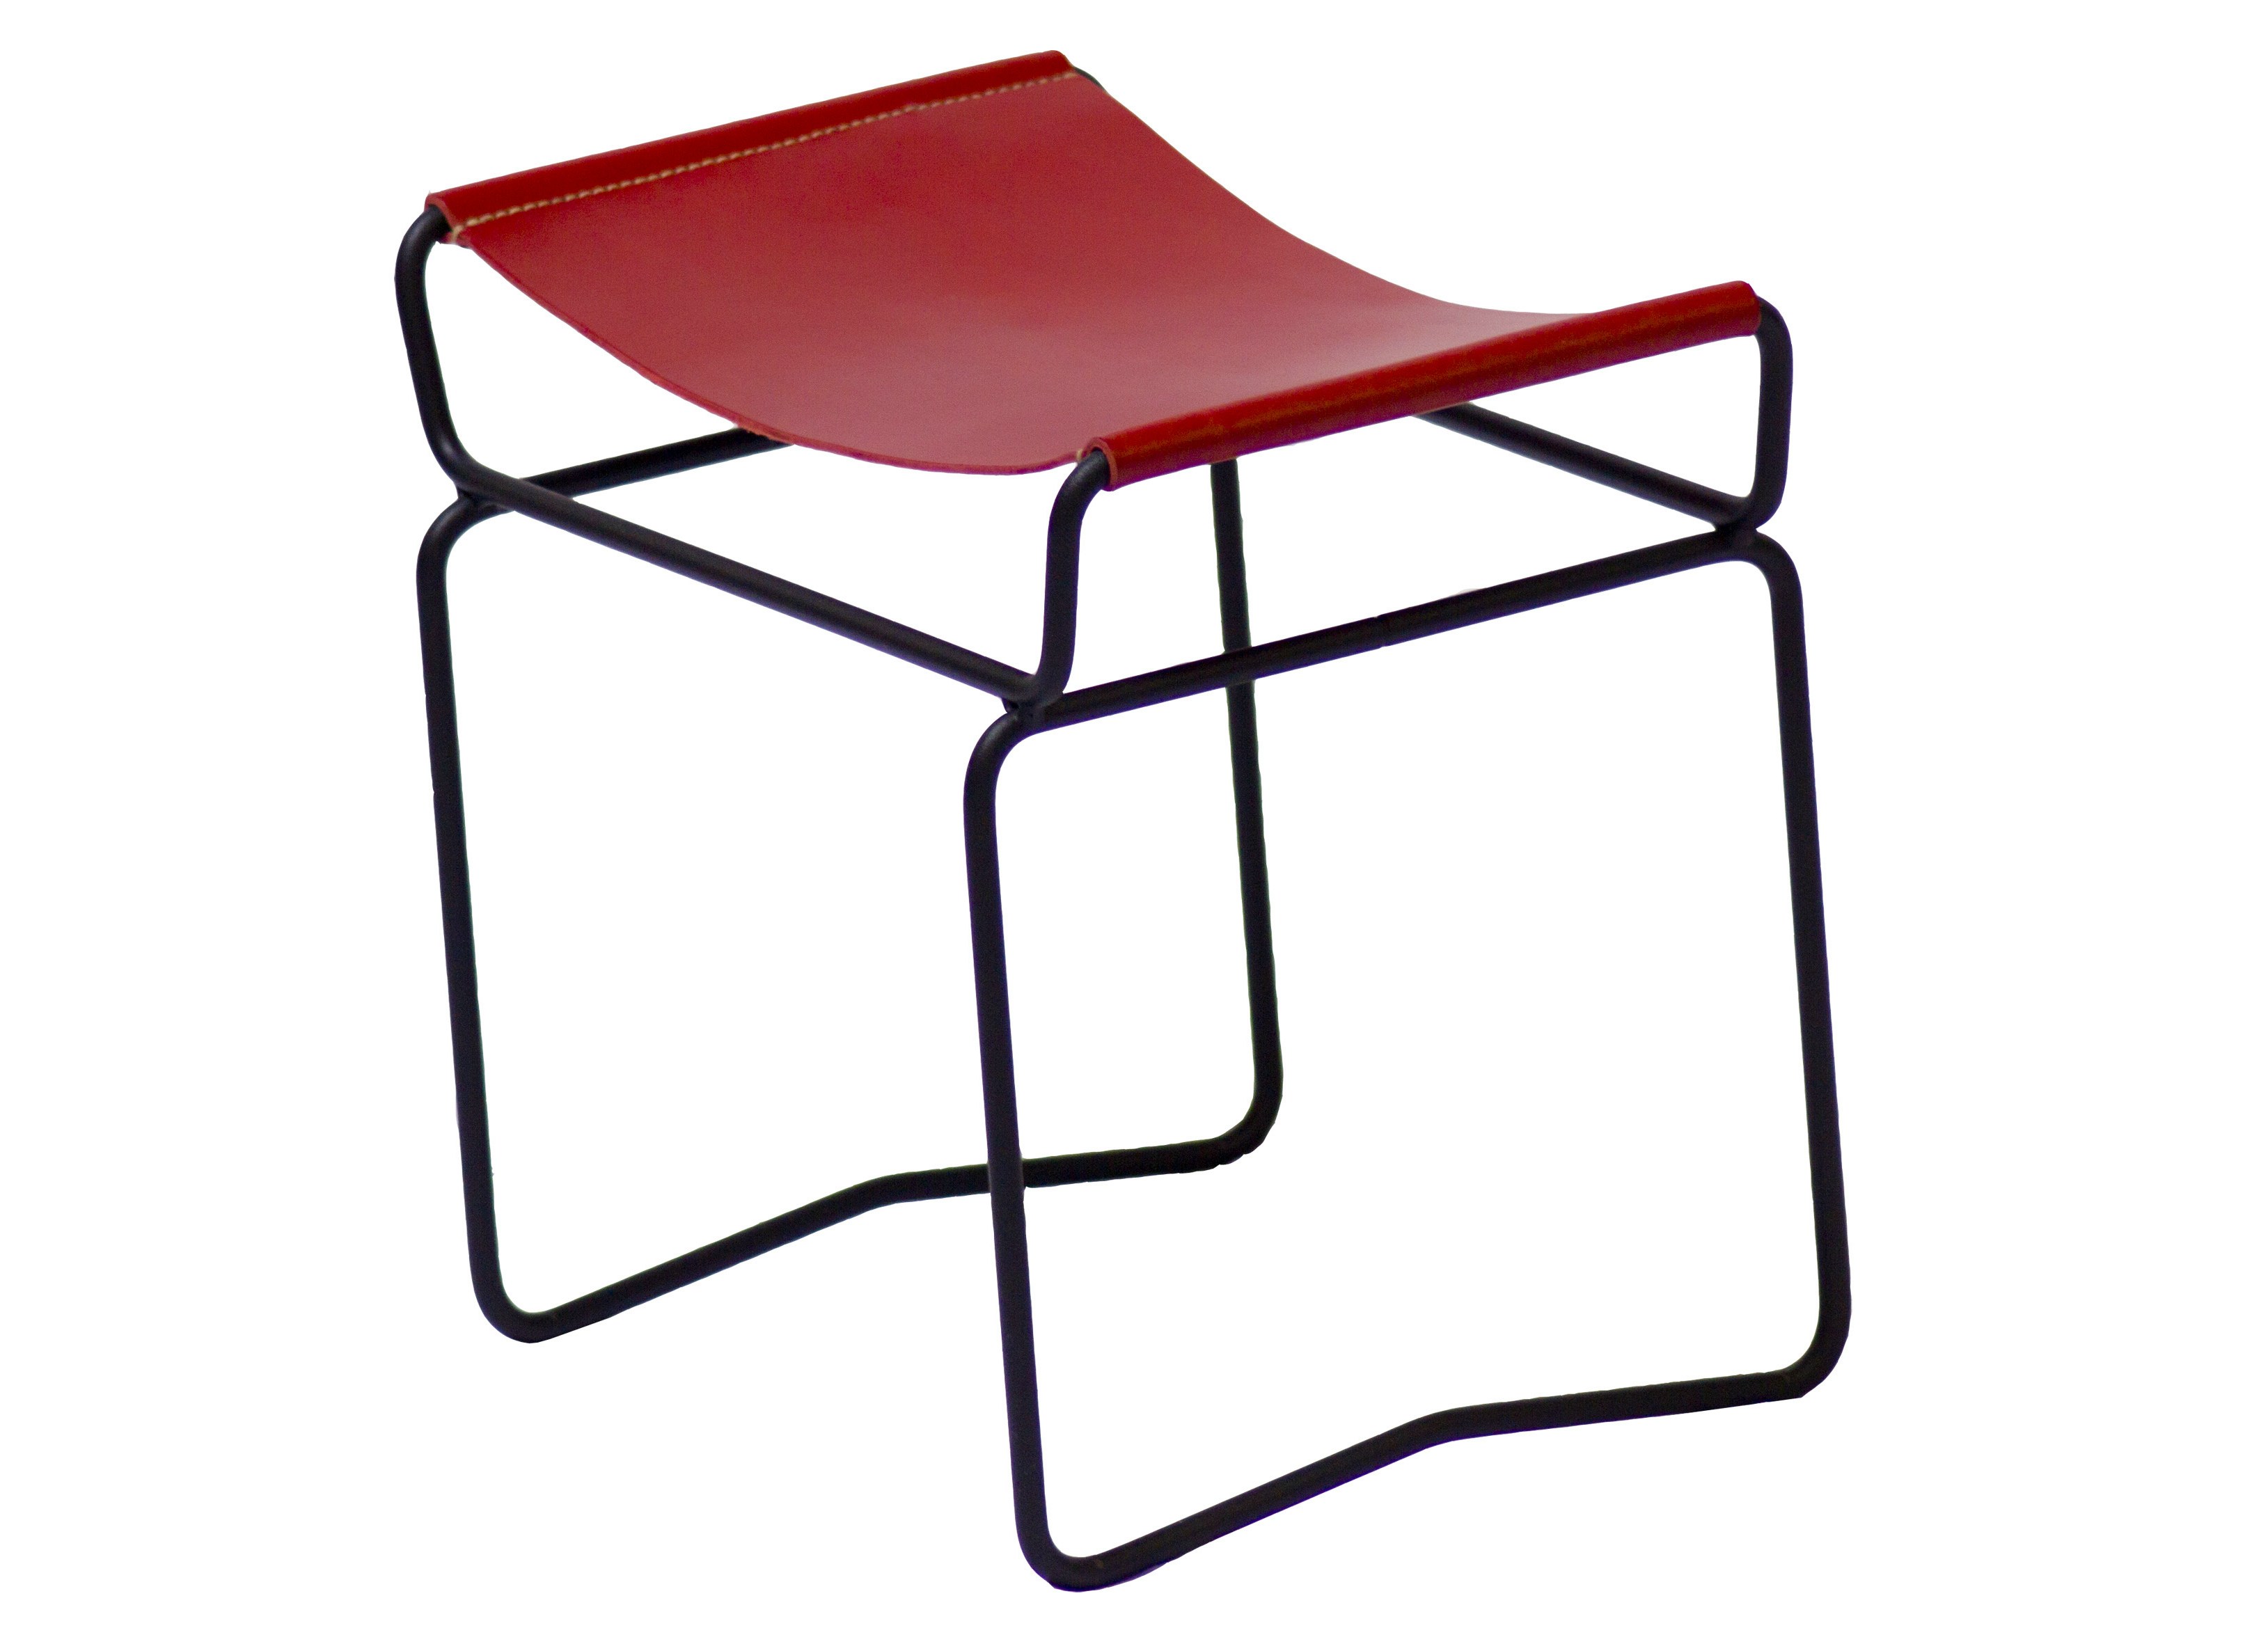 FIL Footstool by François Azambourg for AA New Design